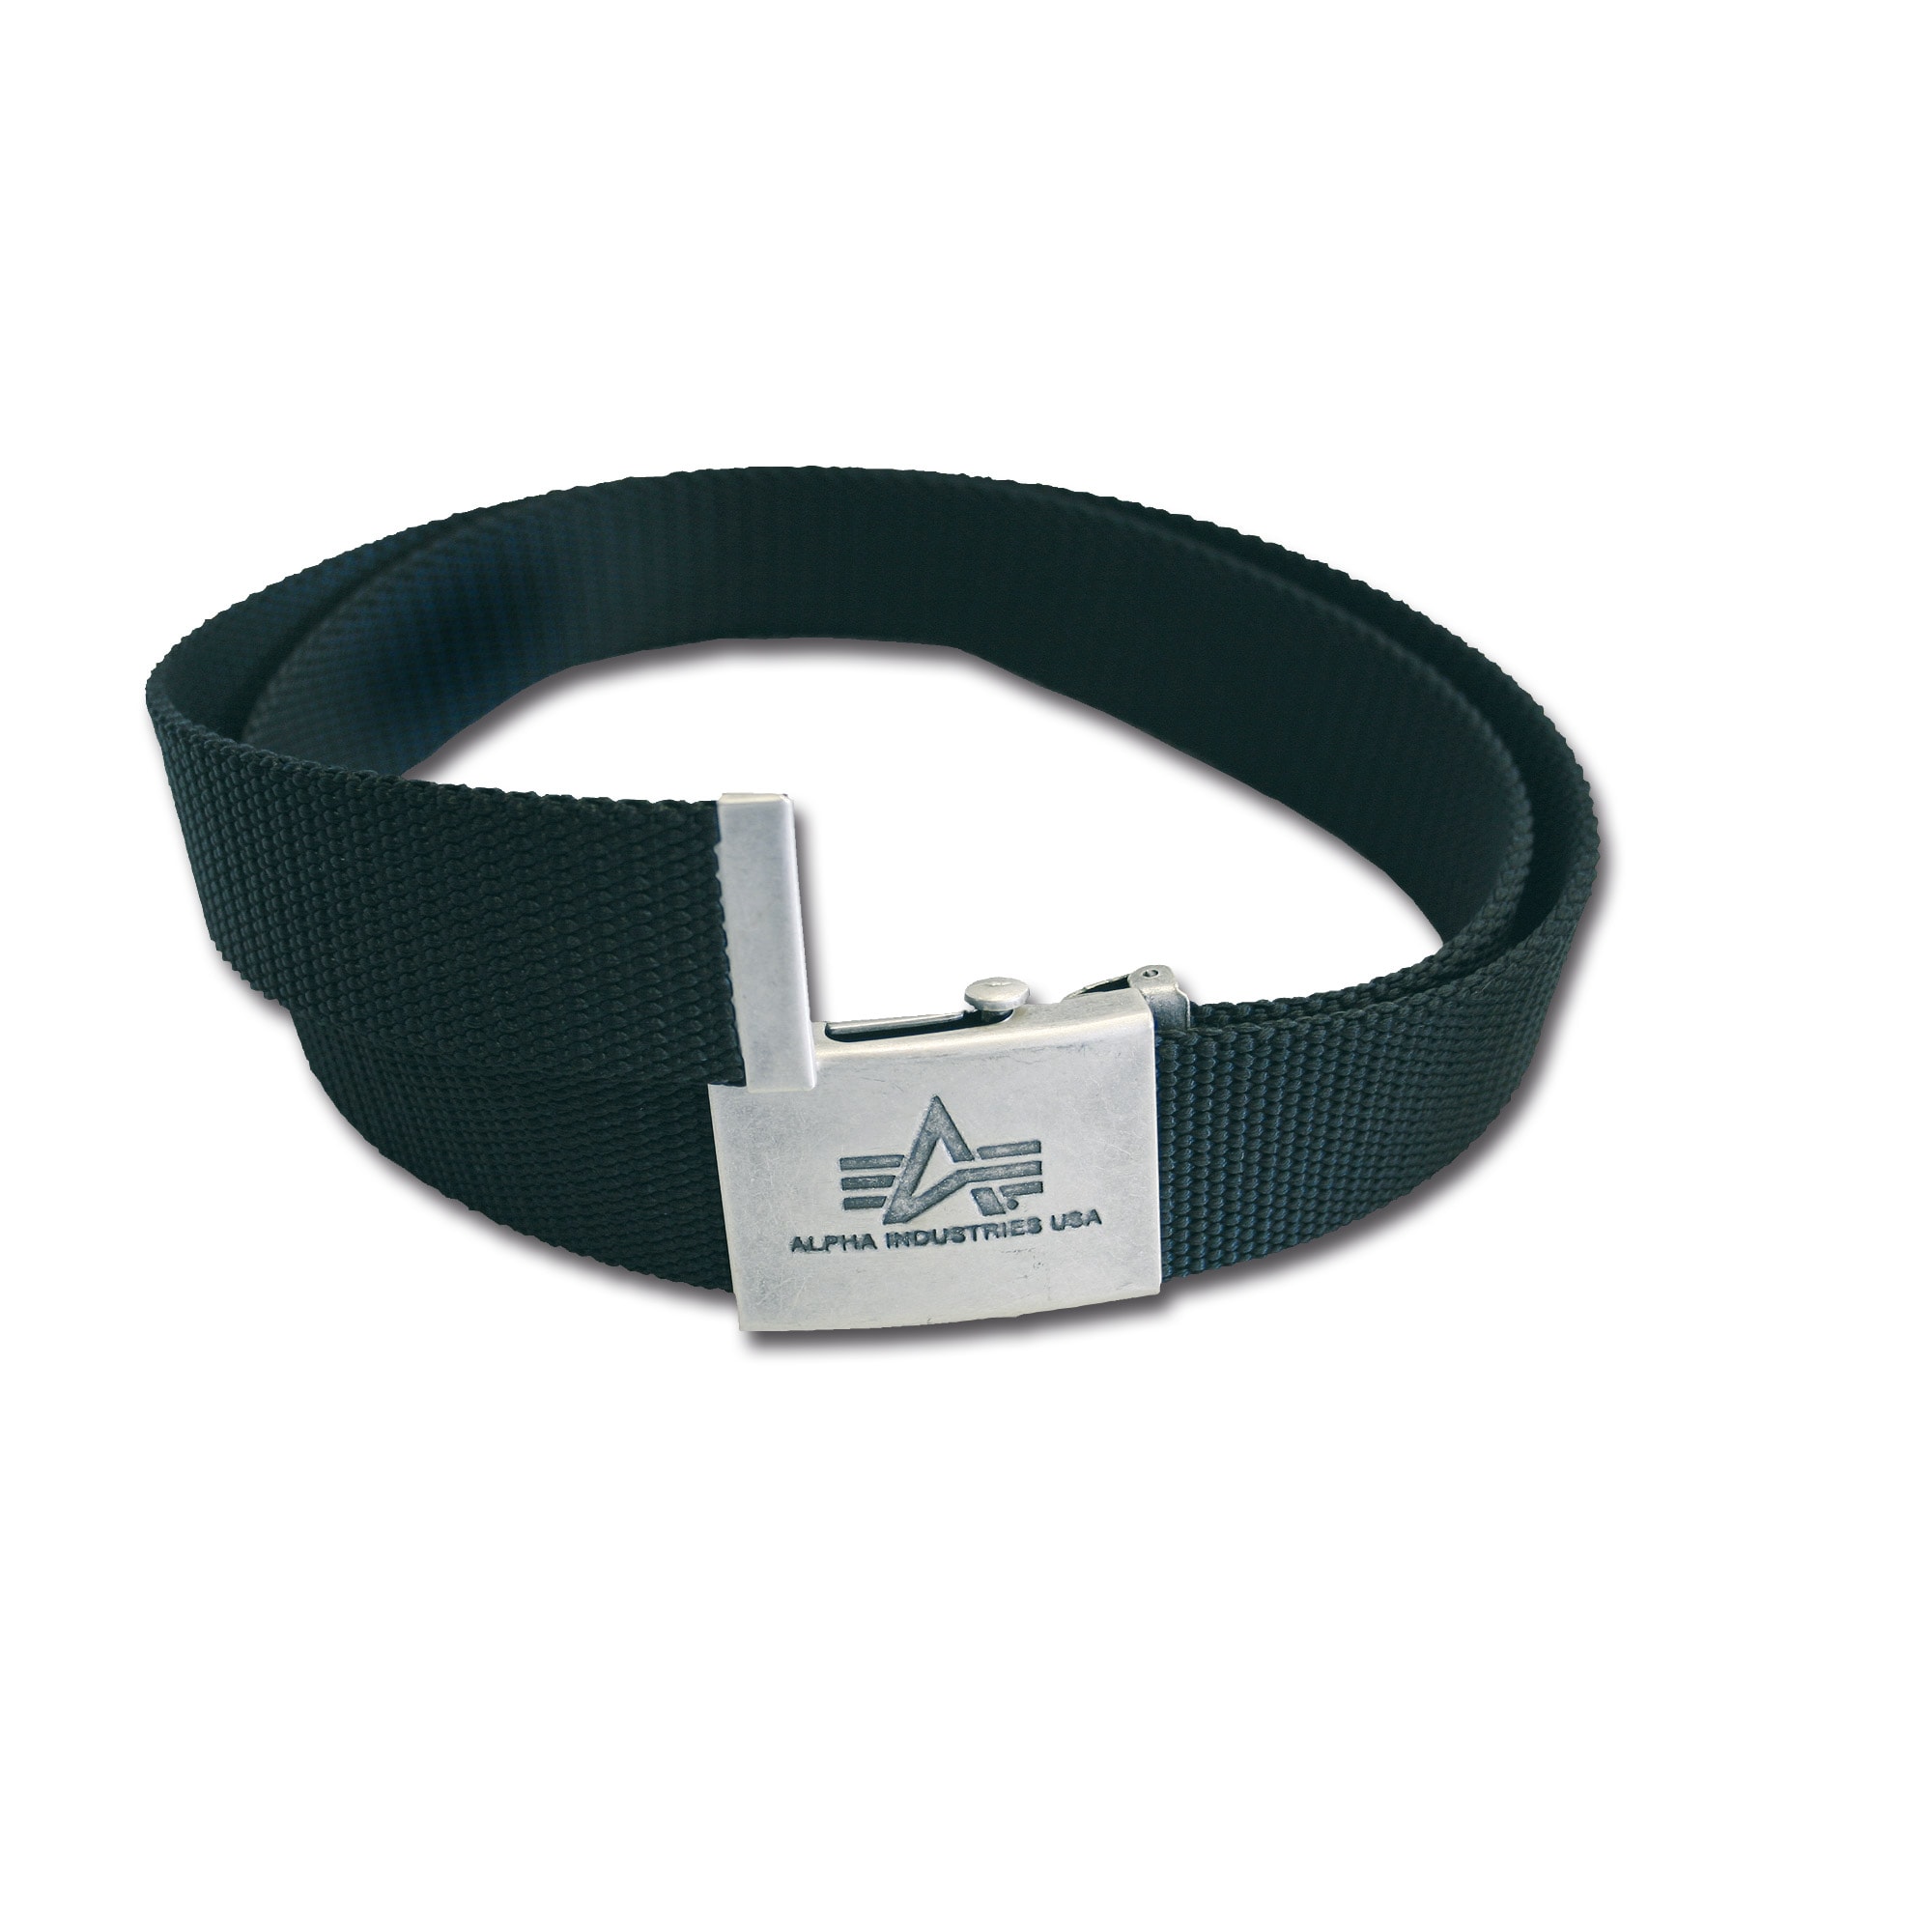 the ASMC Purchase Belt Industries black by Alpha